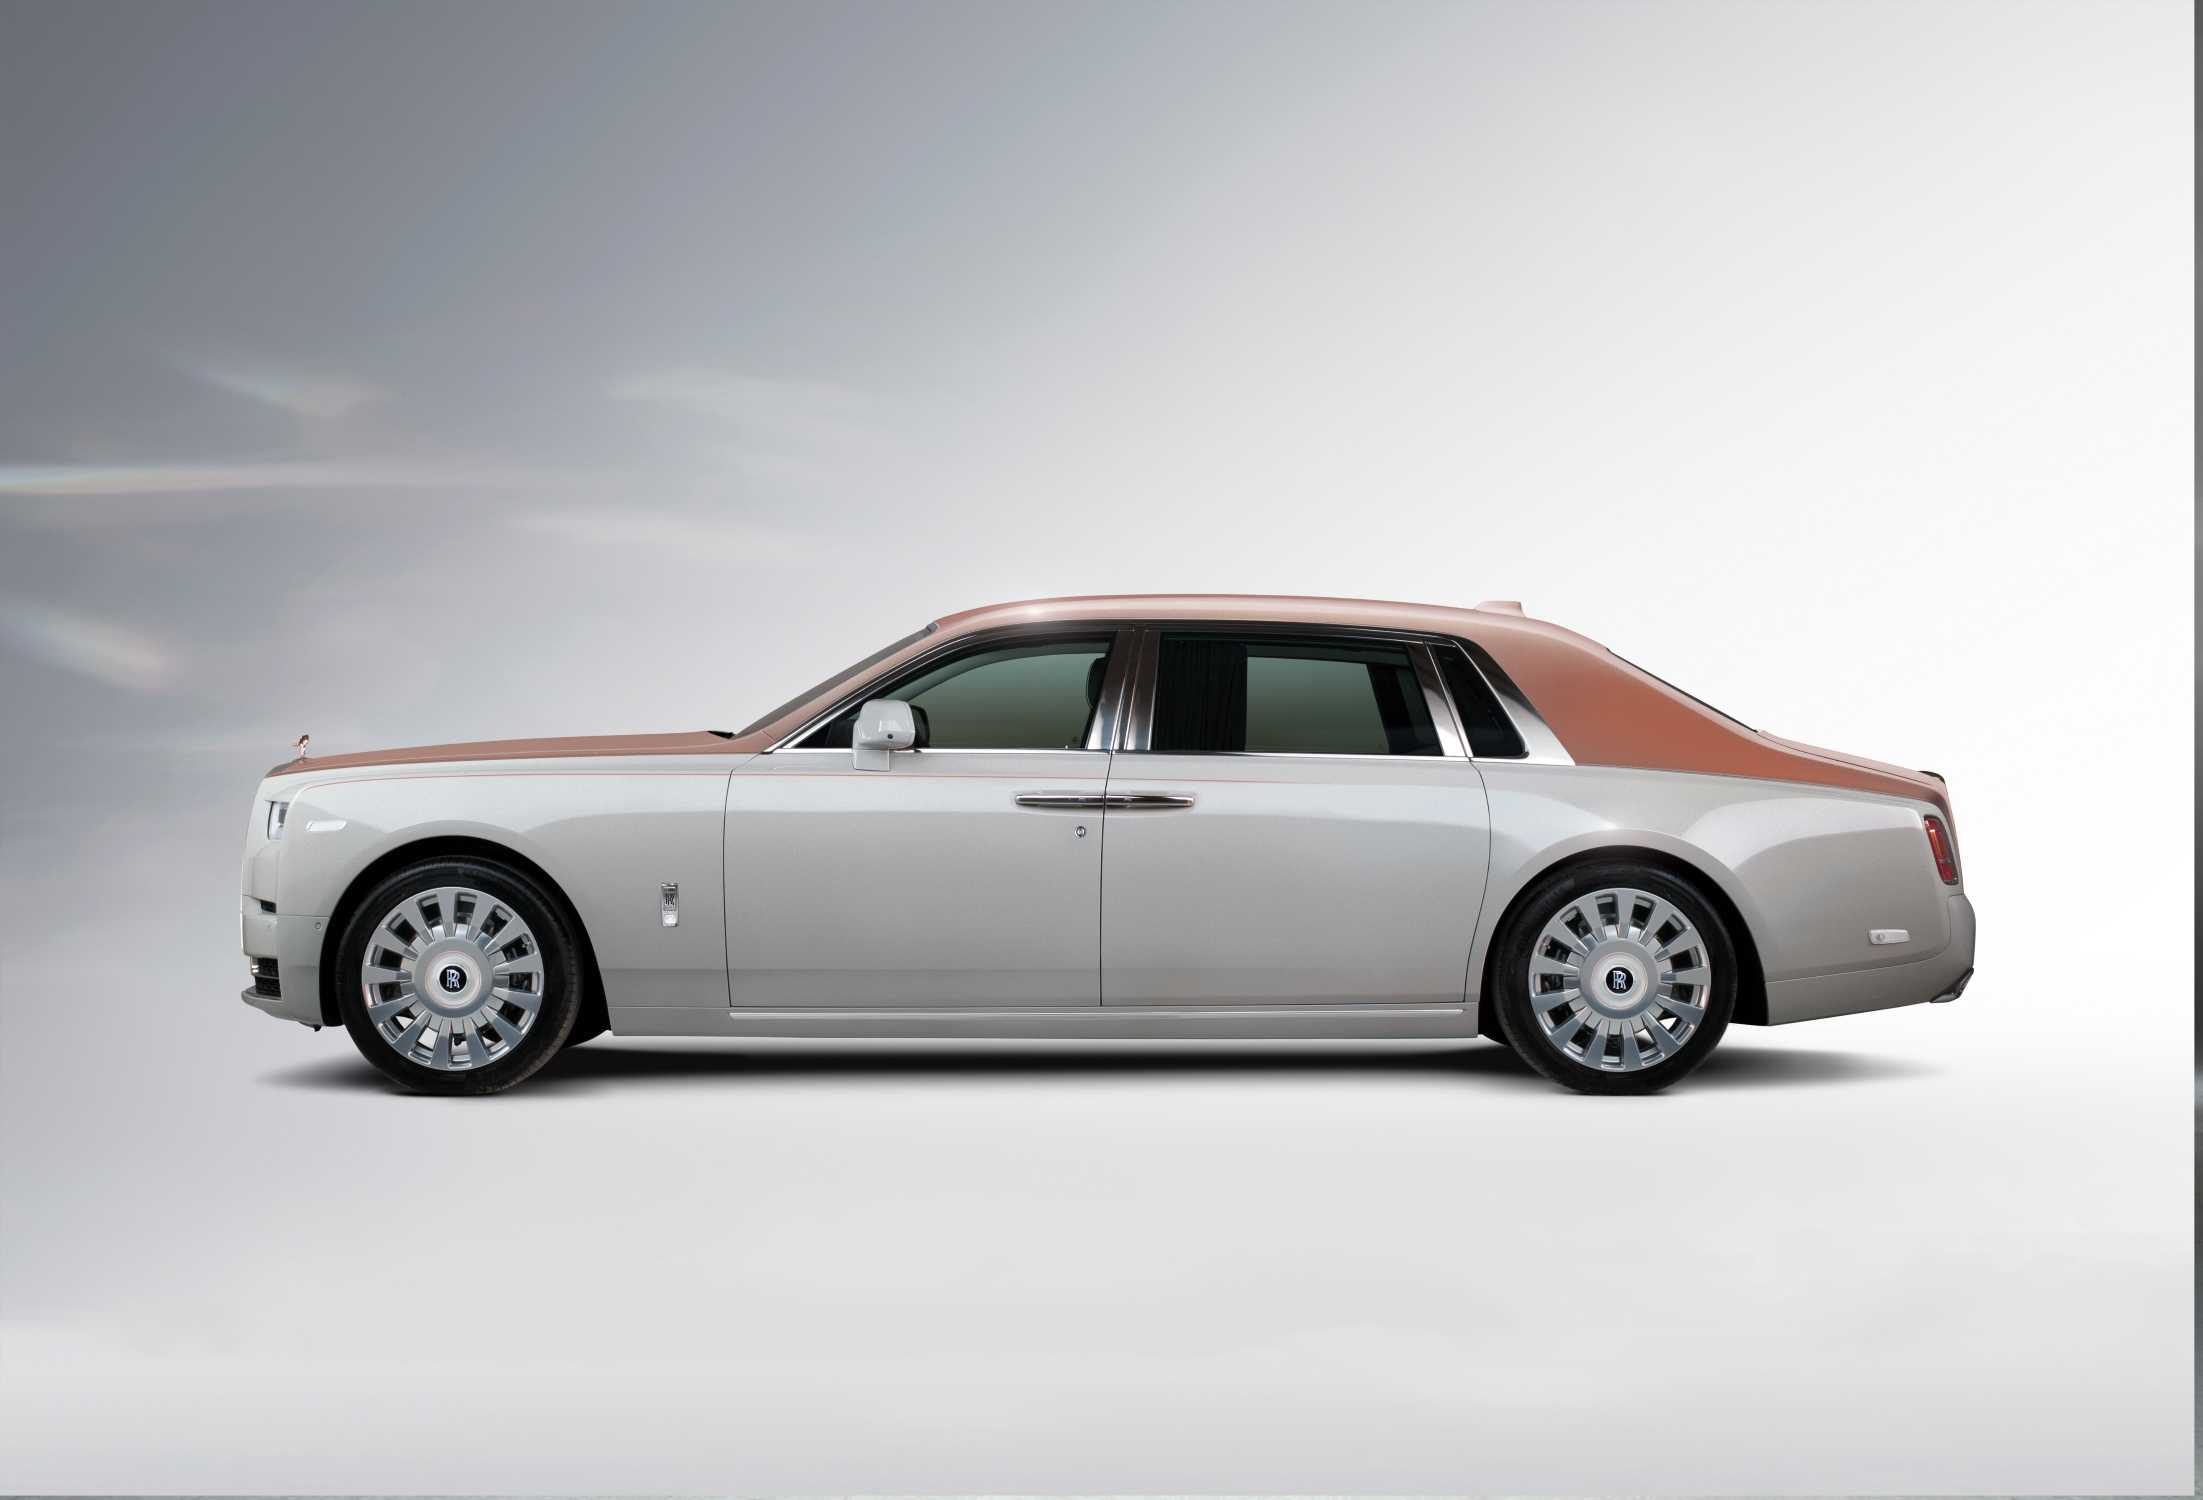 RollsRoyce Phantom Extended Wheelbase On Road Price Petrol Features   Specs Images